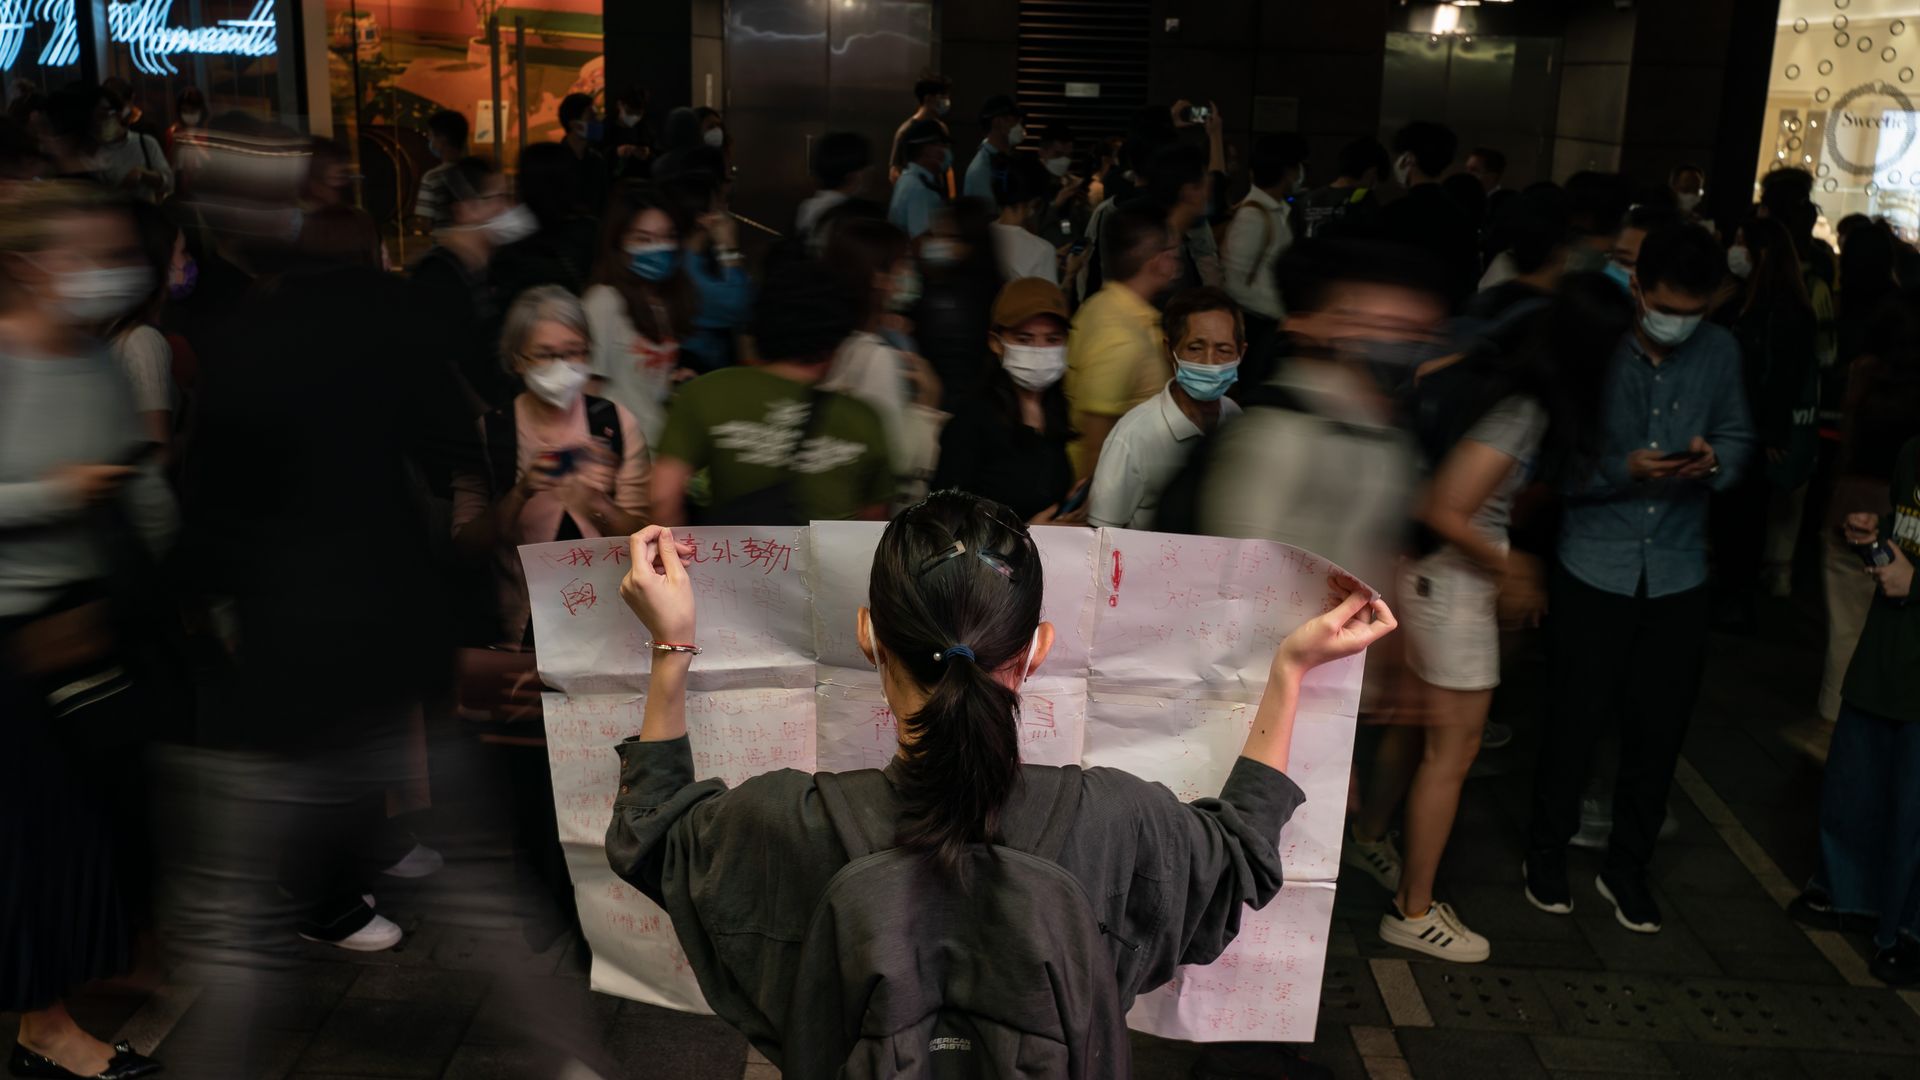 A resident holds a sign in protest of COVID restriction in mainland during a vigil in the central district on November 28, 2022 in Hong Kong, China.